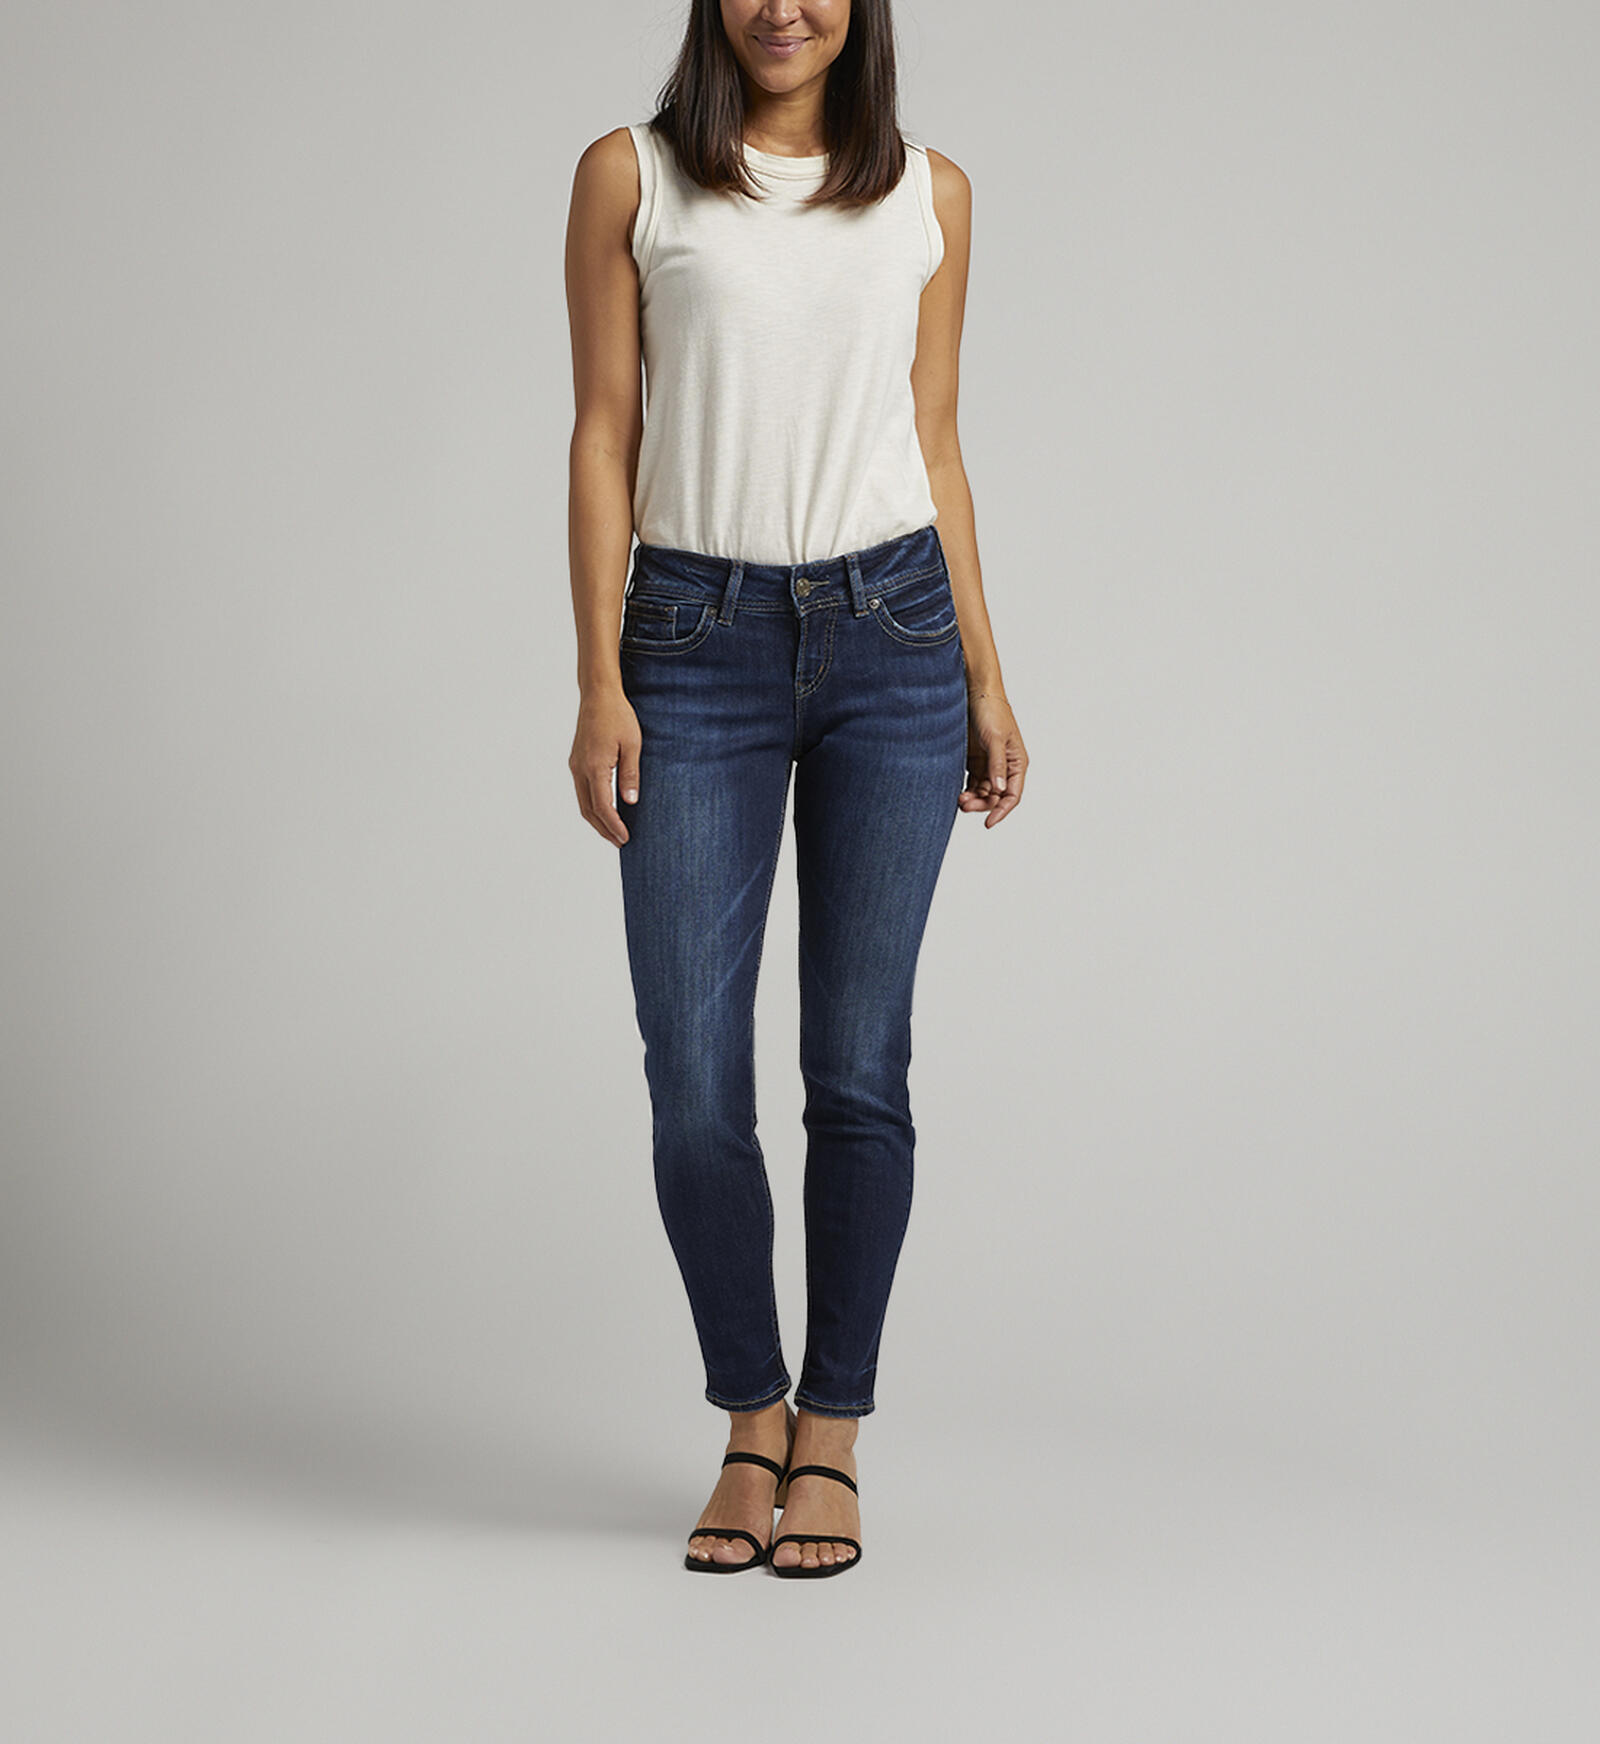 Buy Suki Mid Rise Skinny Jeans for CAD 74.00